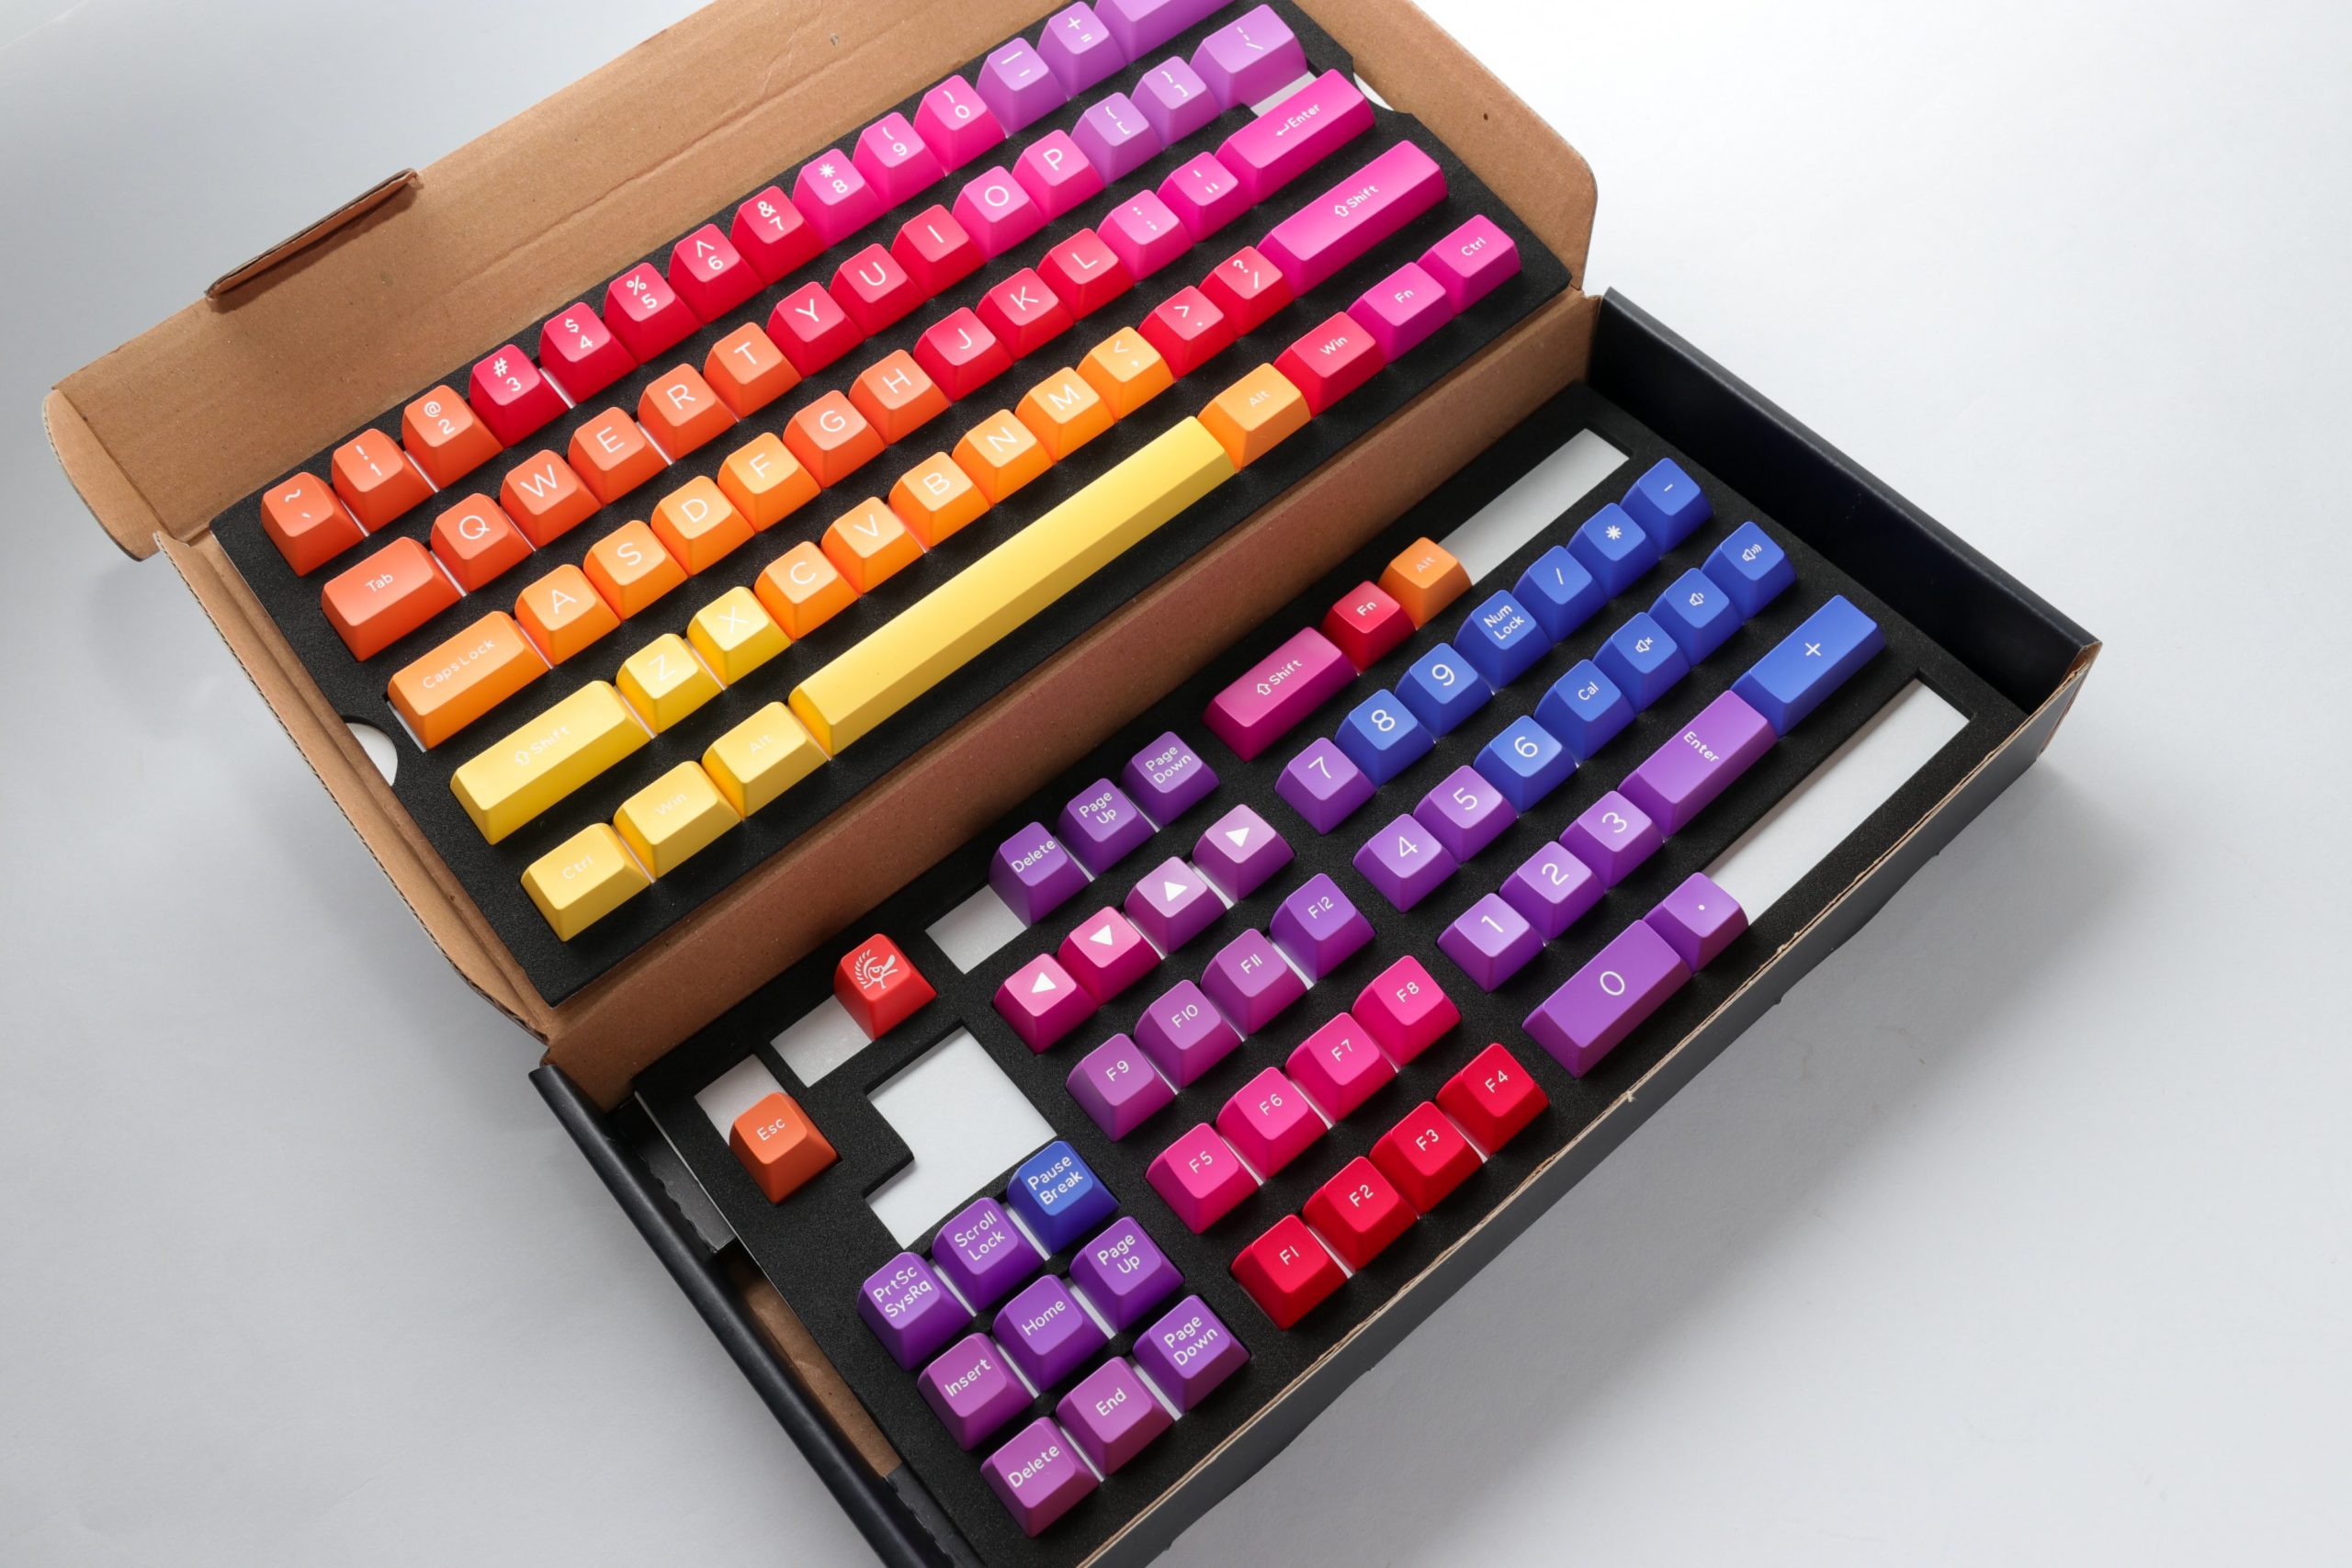 MECKEYS - Mechanical Keyboards and E-Sports Accessories